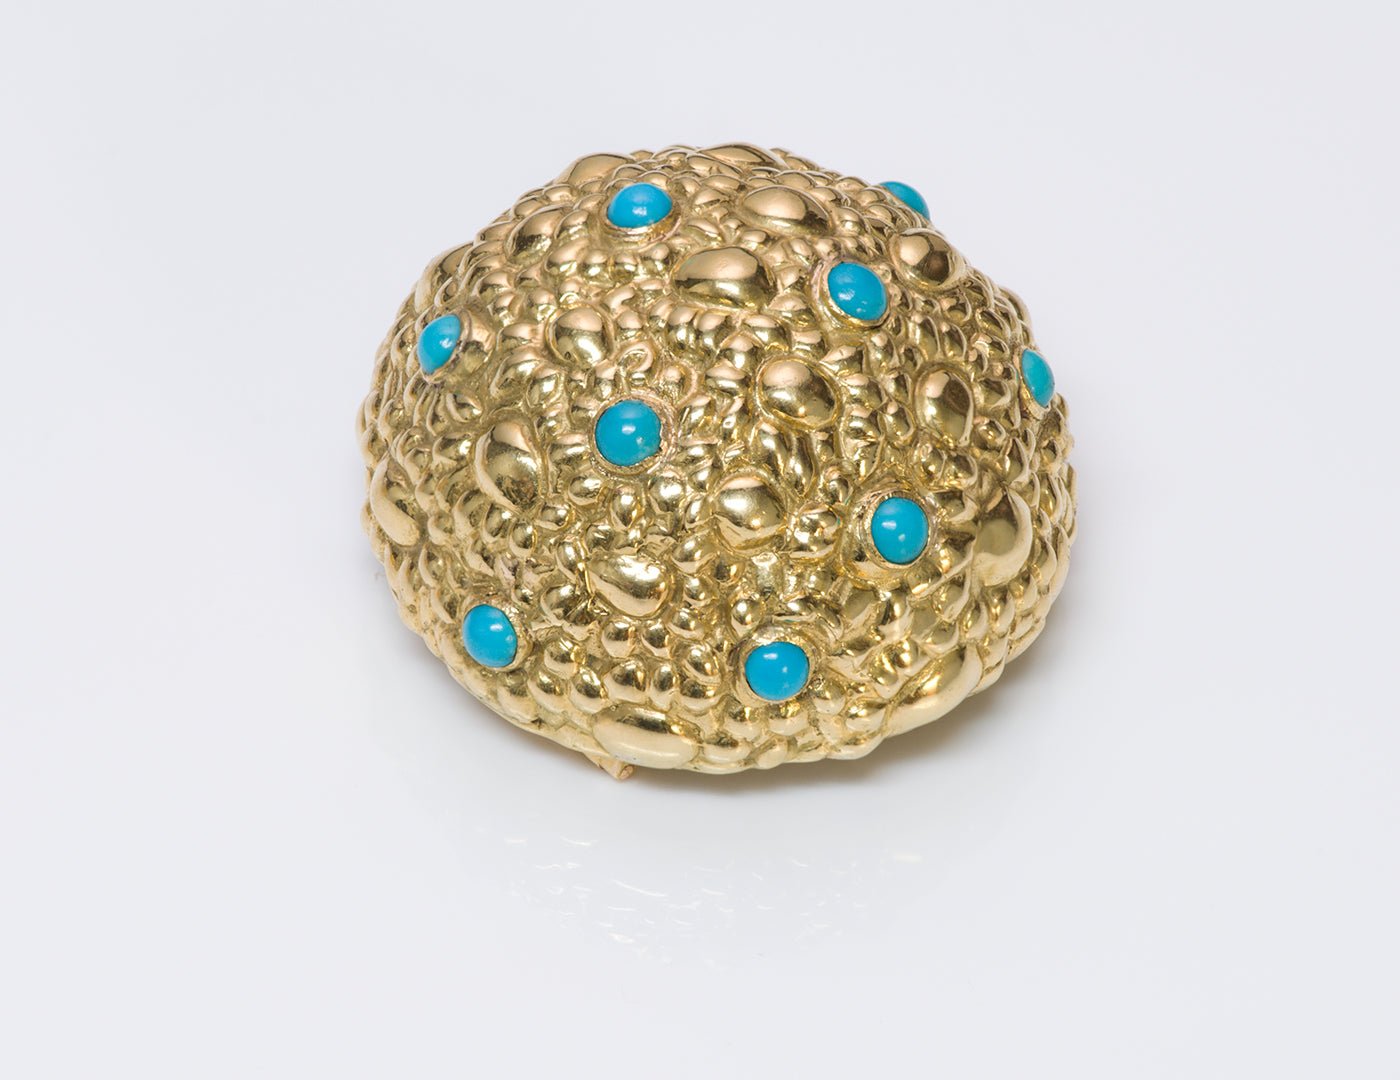 Tiffany & Co. Dome Gold Turquoise Brooch